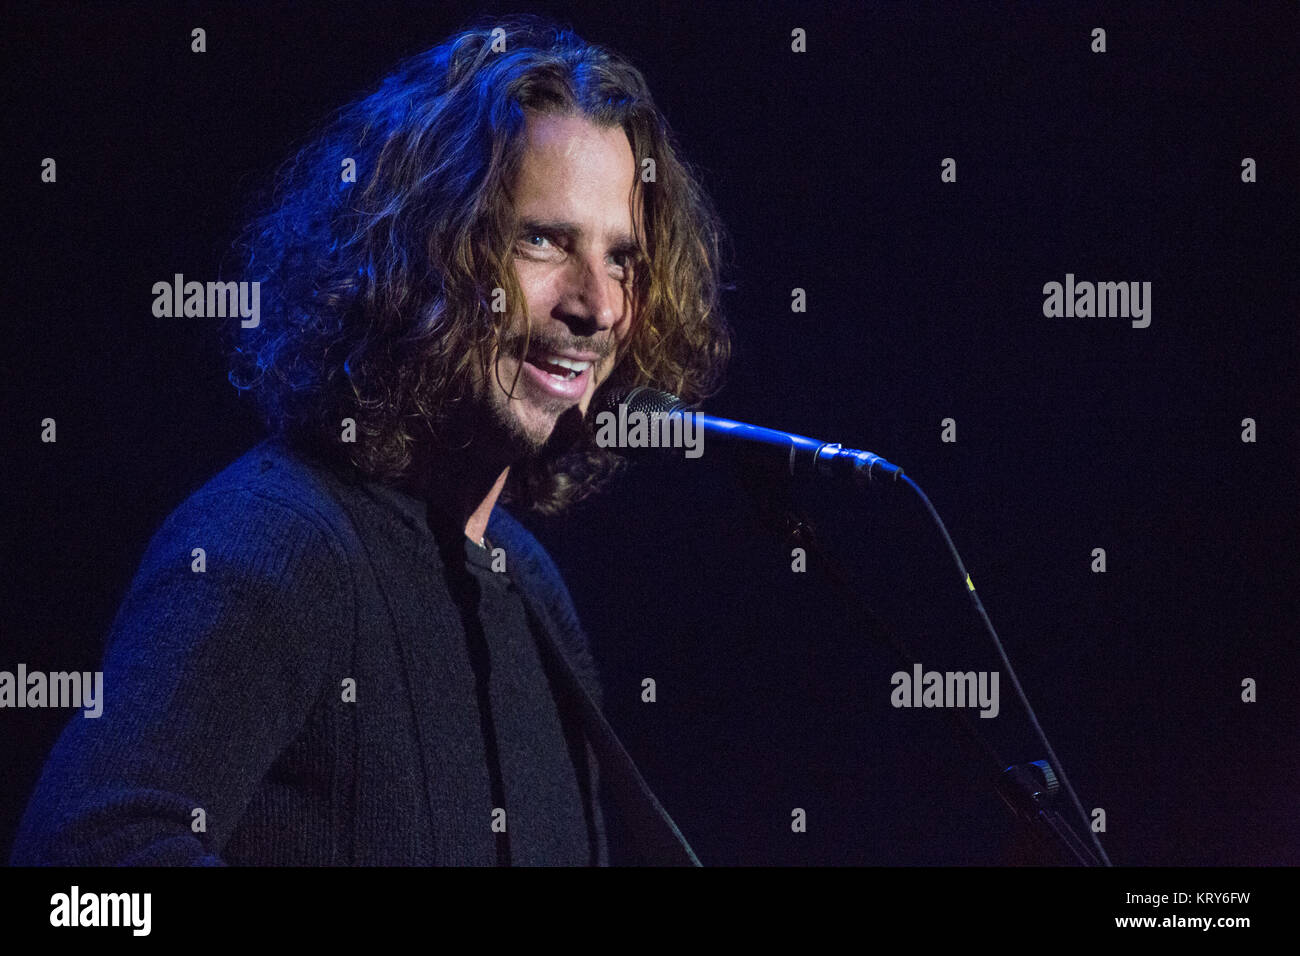 The American singer, songwriter and guitarist Chris Cornell performs a live concert at Folketeatret in Oslo. Chris Cornell is also known as the vocalist of the American bands Soundgarden and Audioslave. Norway, 31/03 2016. Stock Photo